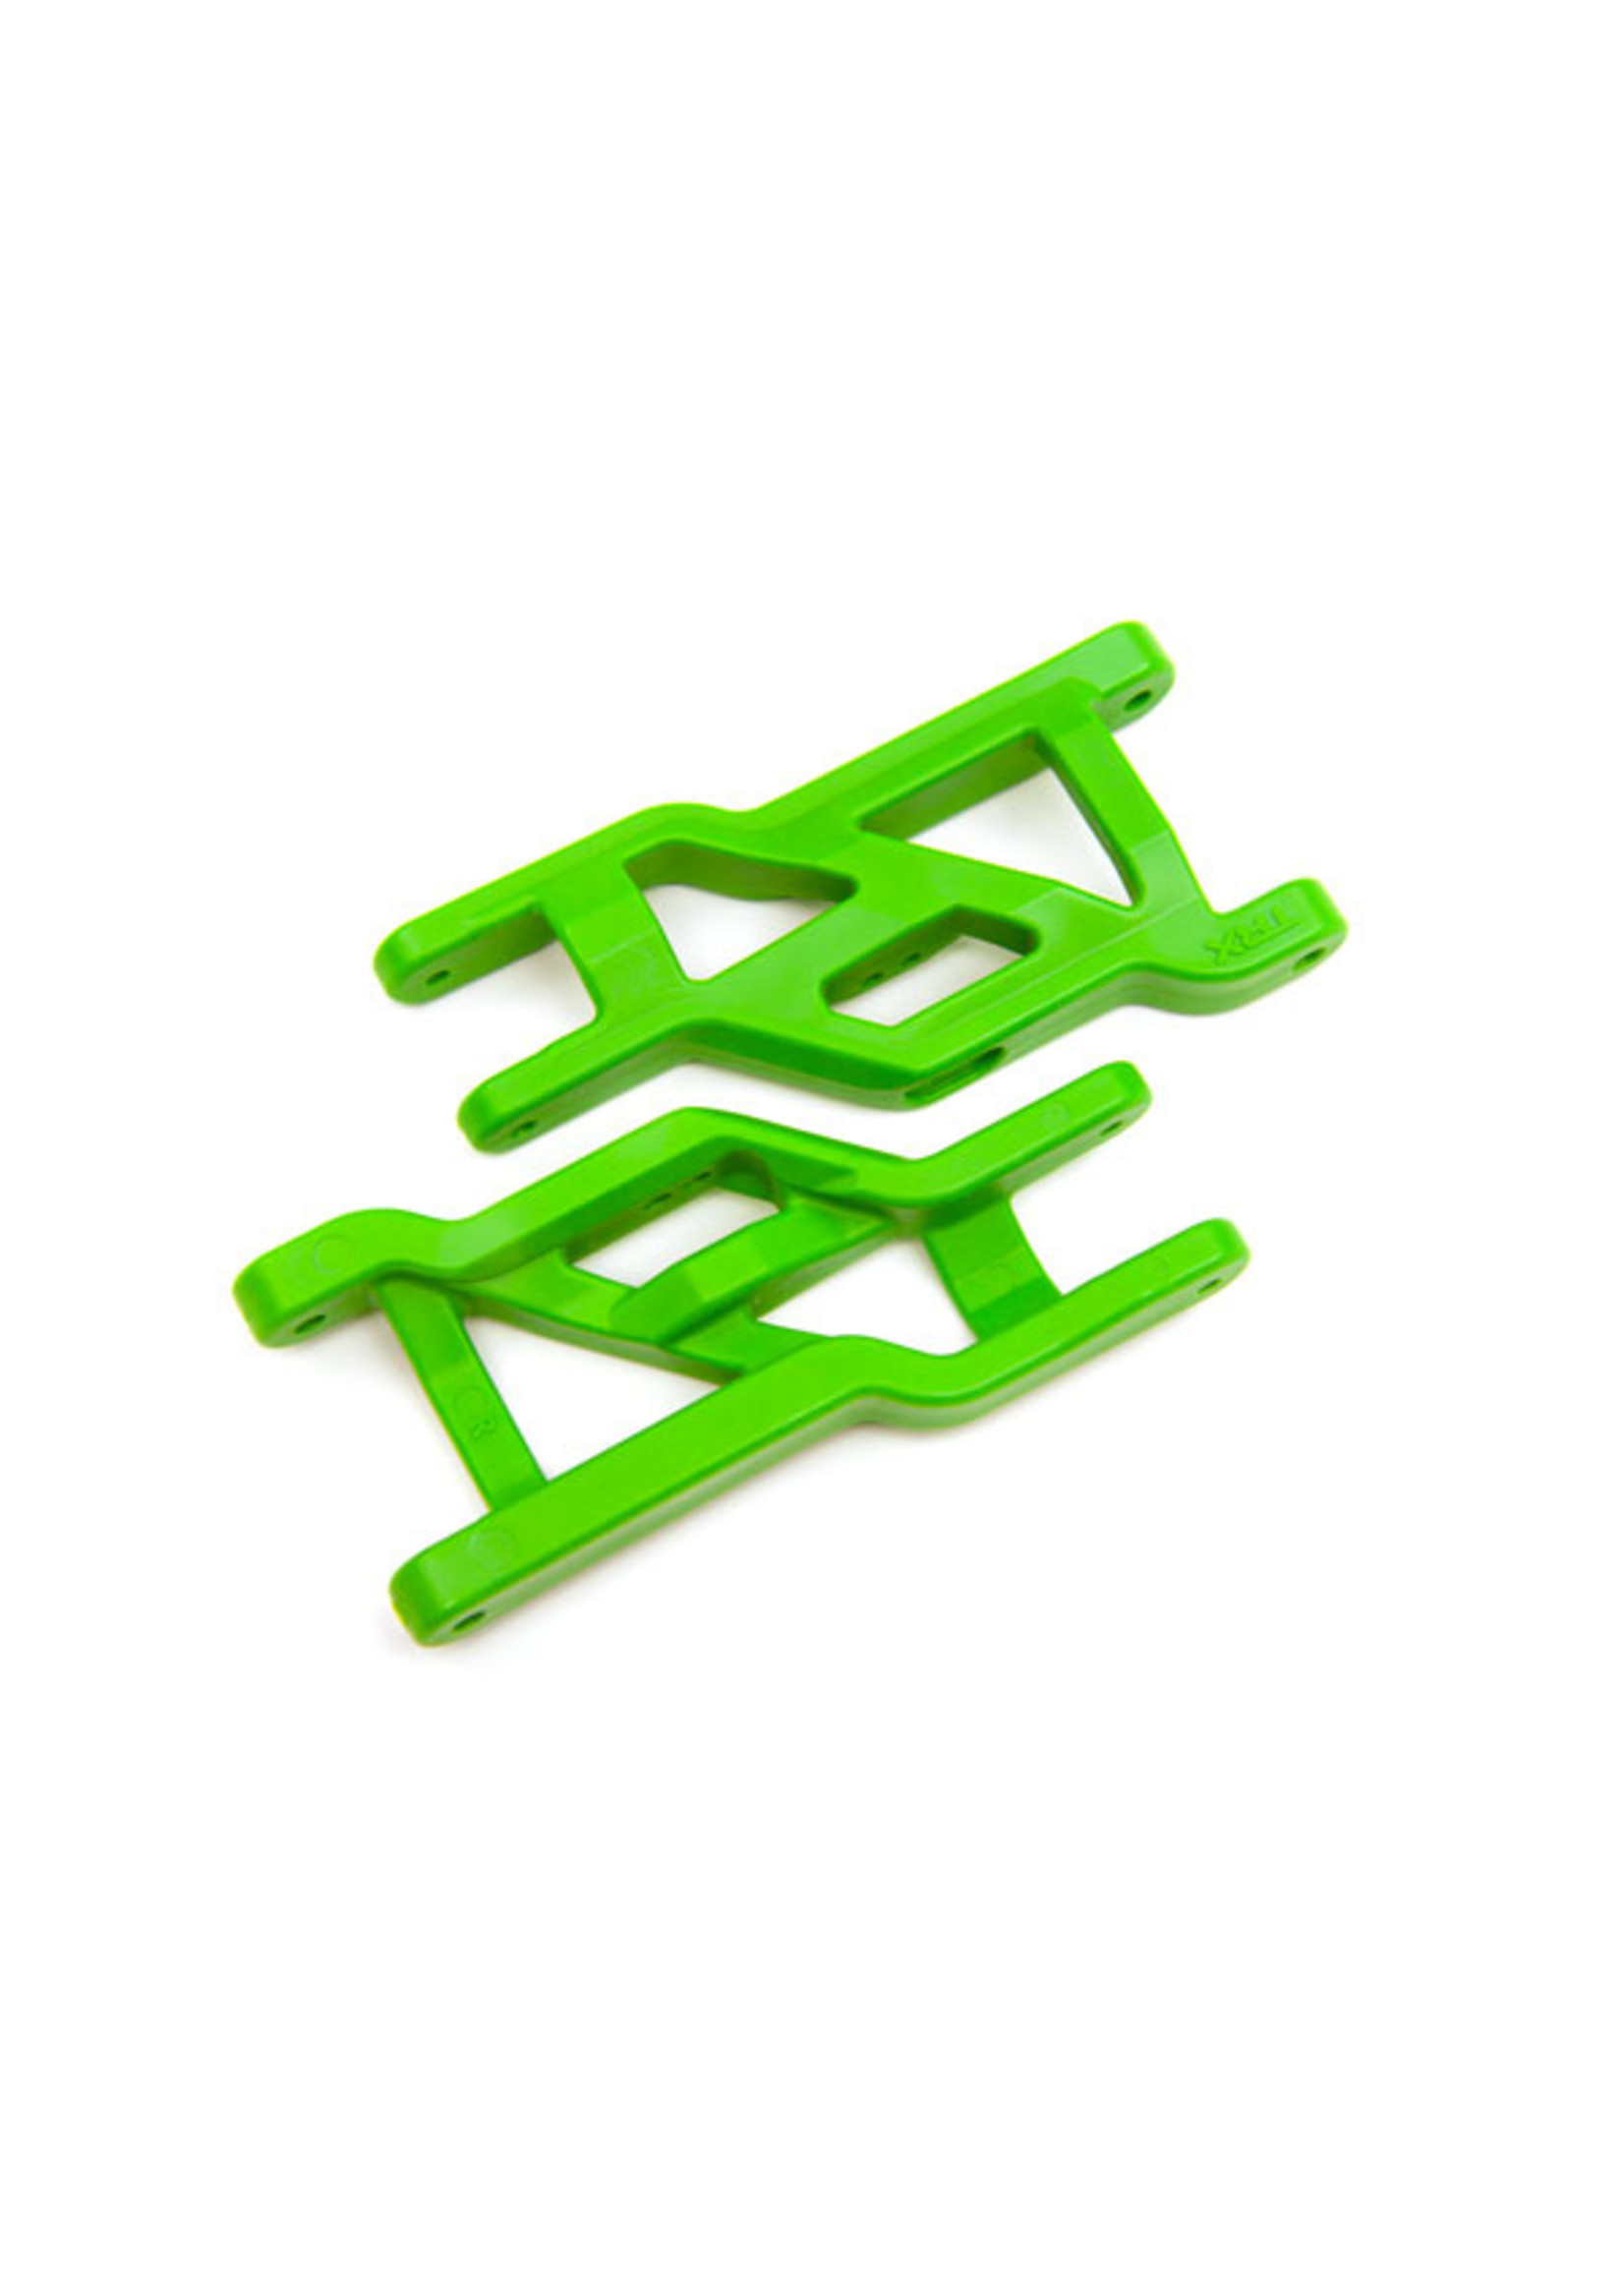 Traxxas 3631G - Heavy Duty Front Suspension Arms - Green